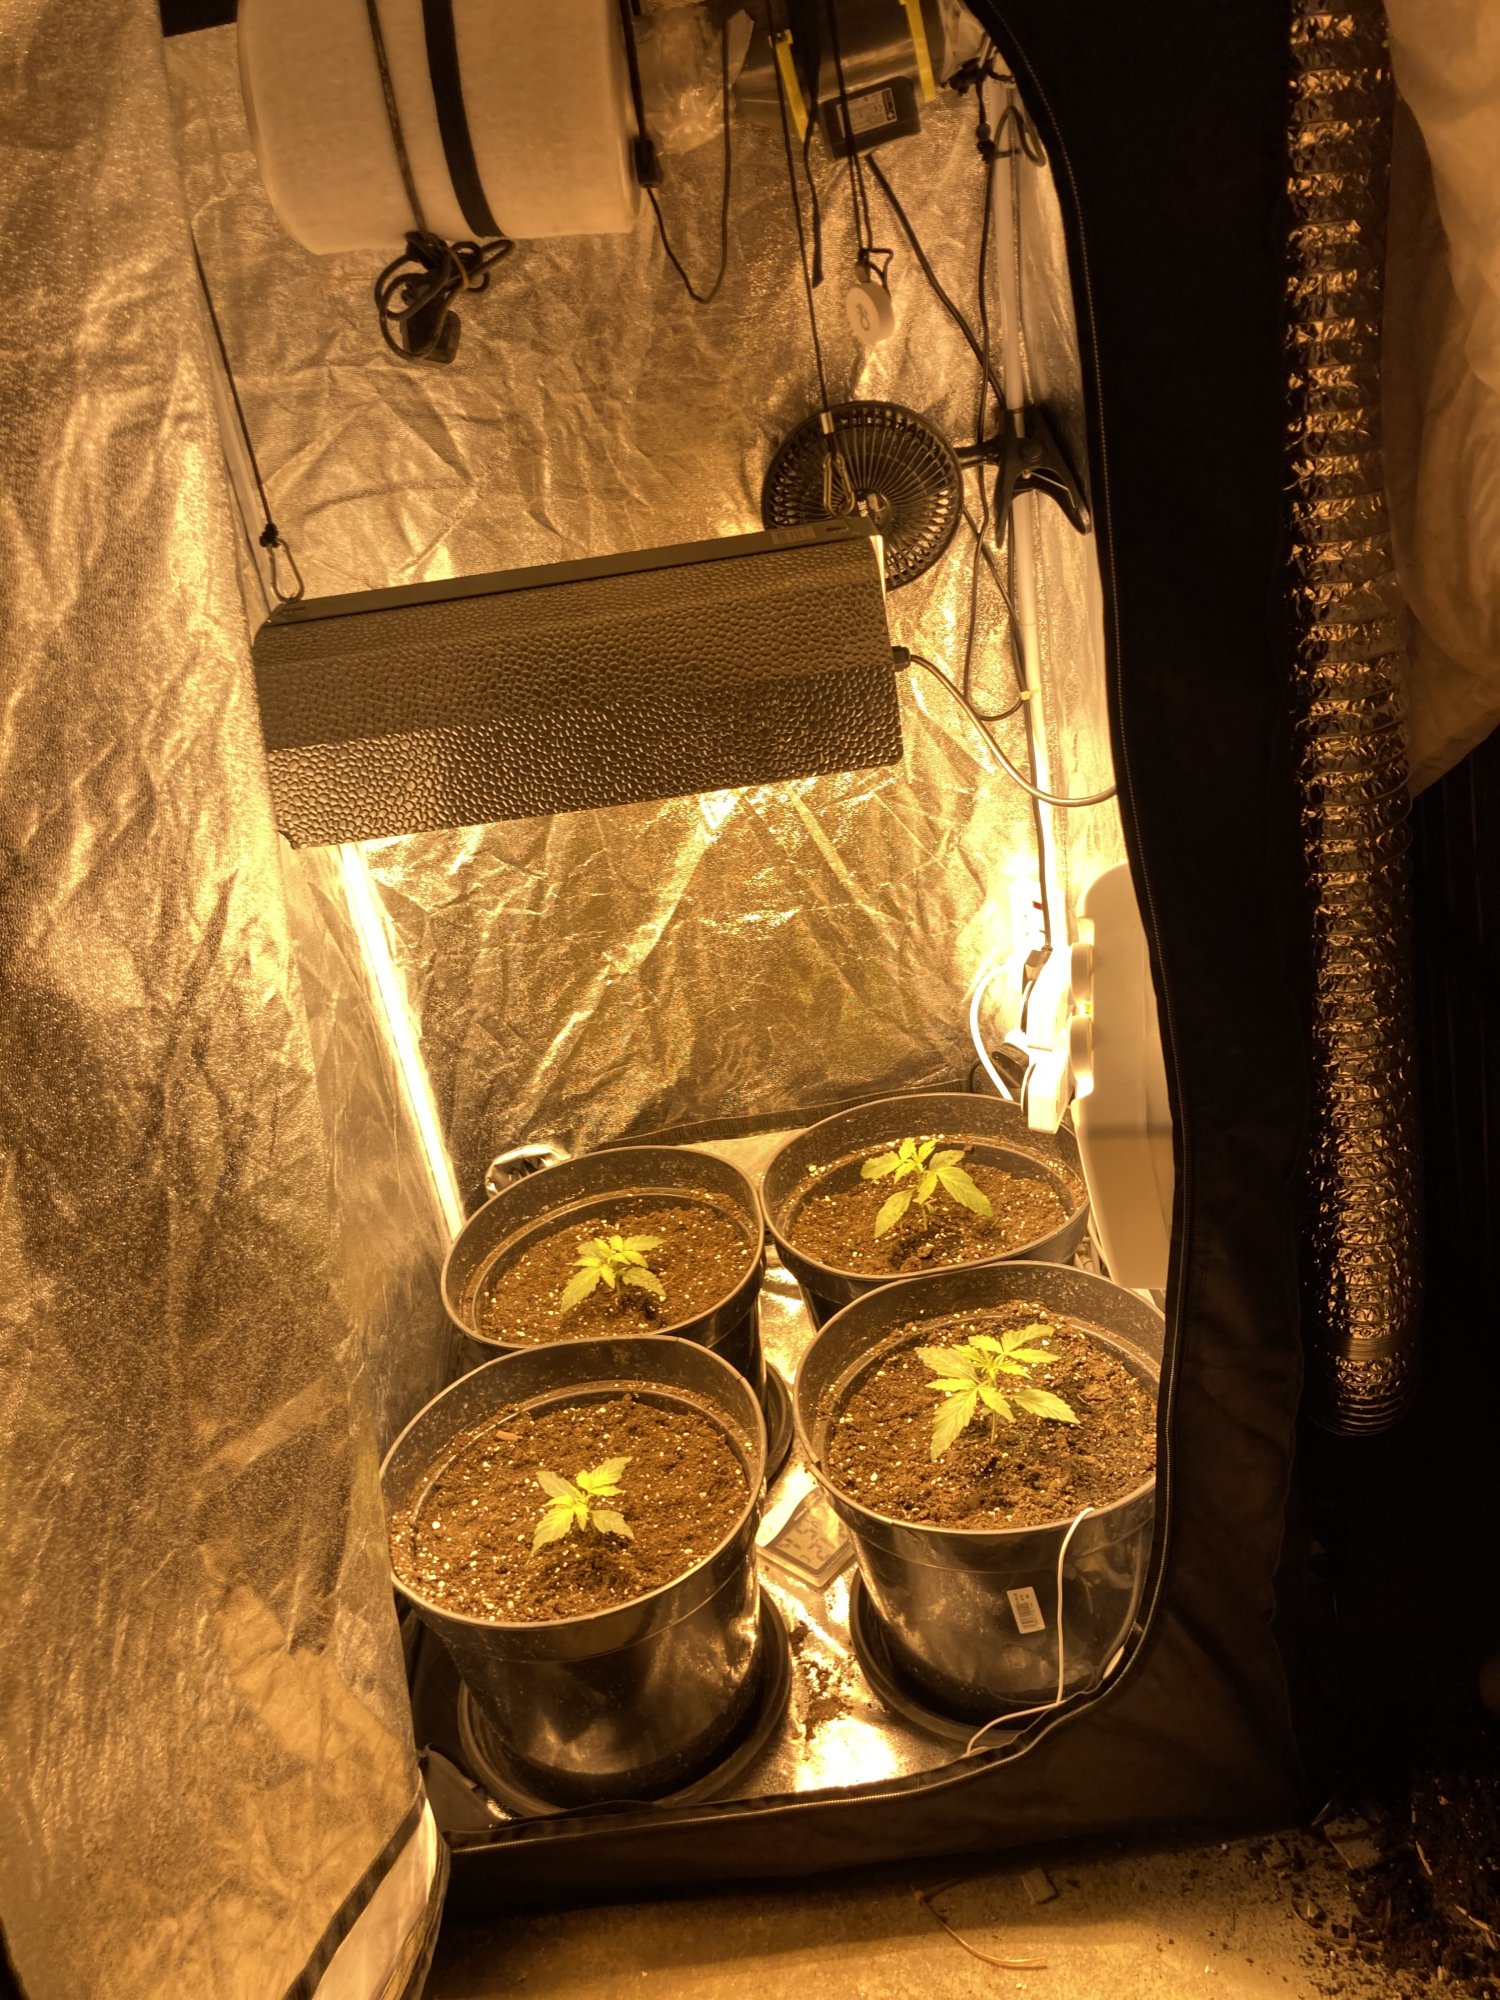 Hey guys take a looks at my grow set ups and grow let me know what you think 2